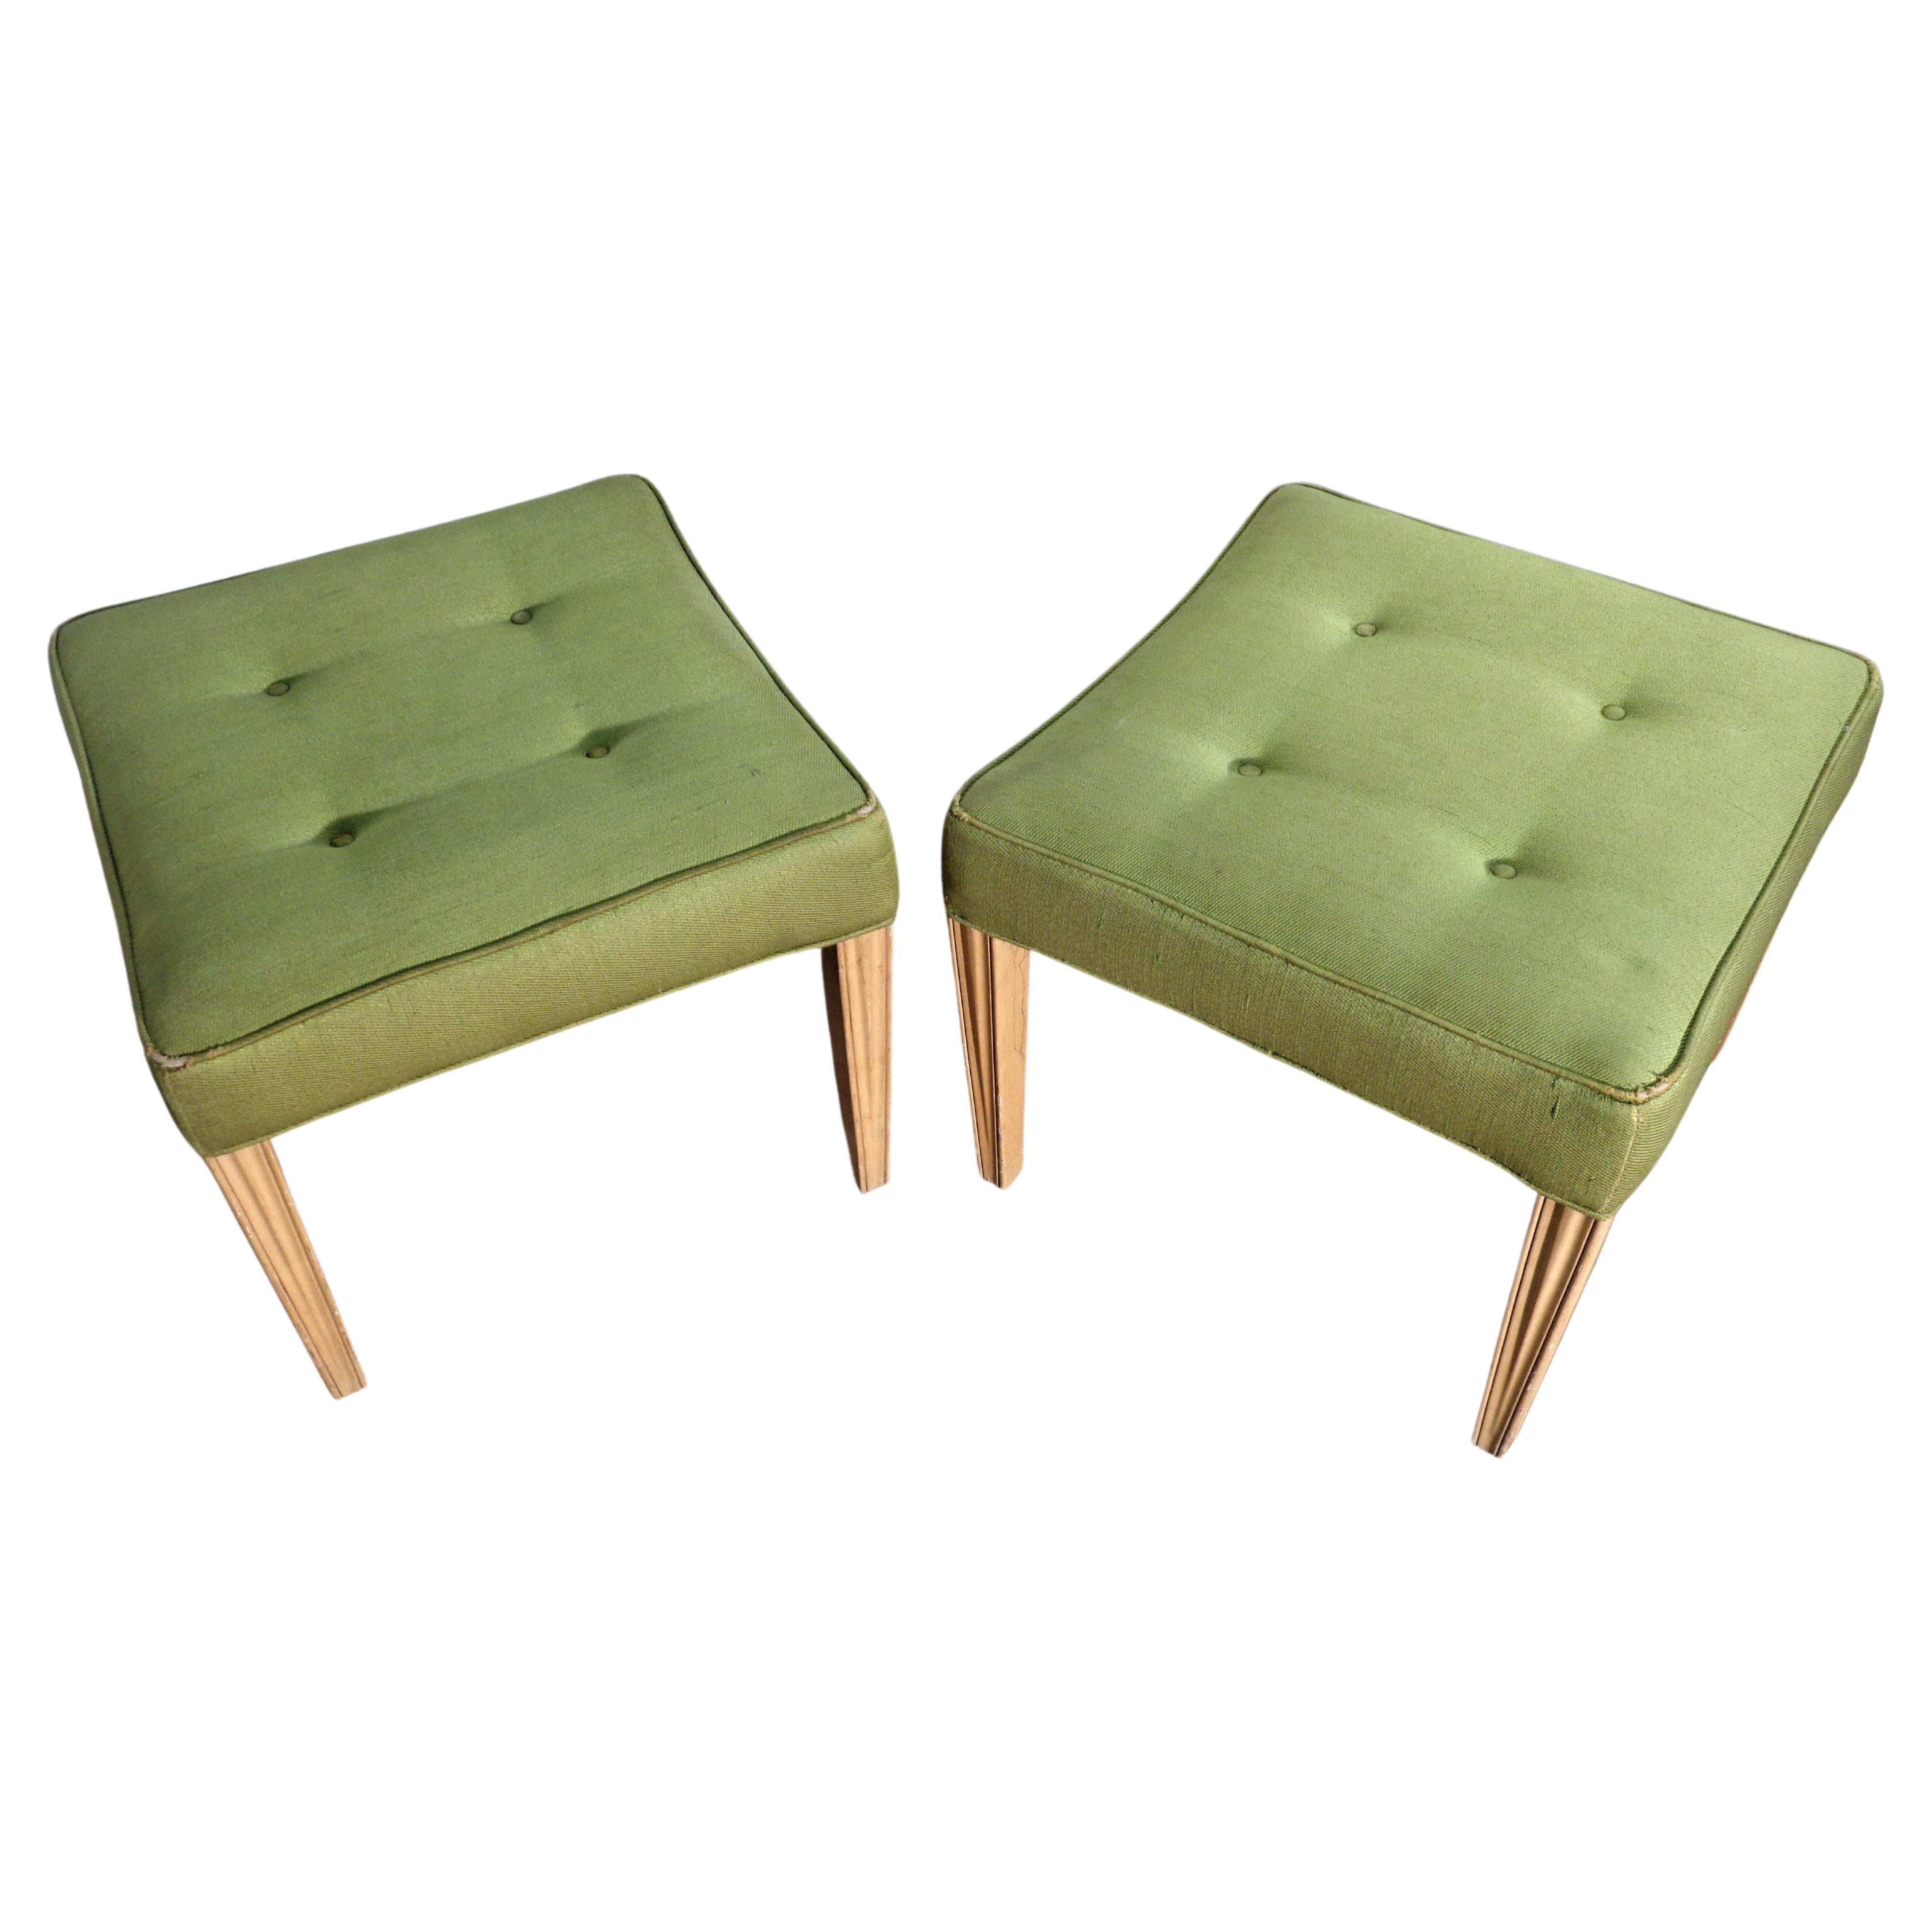 A good looking pair of 1940's regency style stools in the original button tufted contoured upholstered chartreuse cotton seats w/ beautifully aged cream painted reeded tapered wood legs. Look at all pictures and read condition report in comment